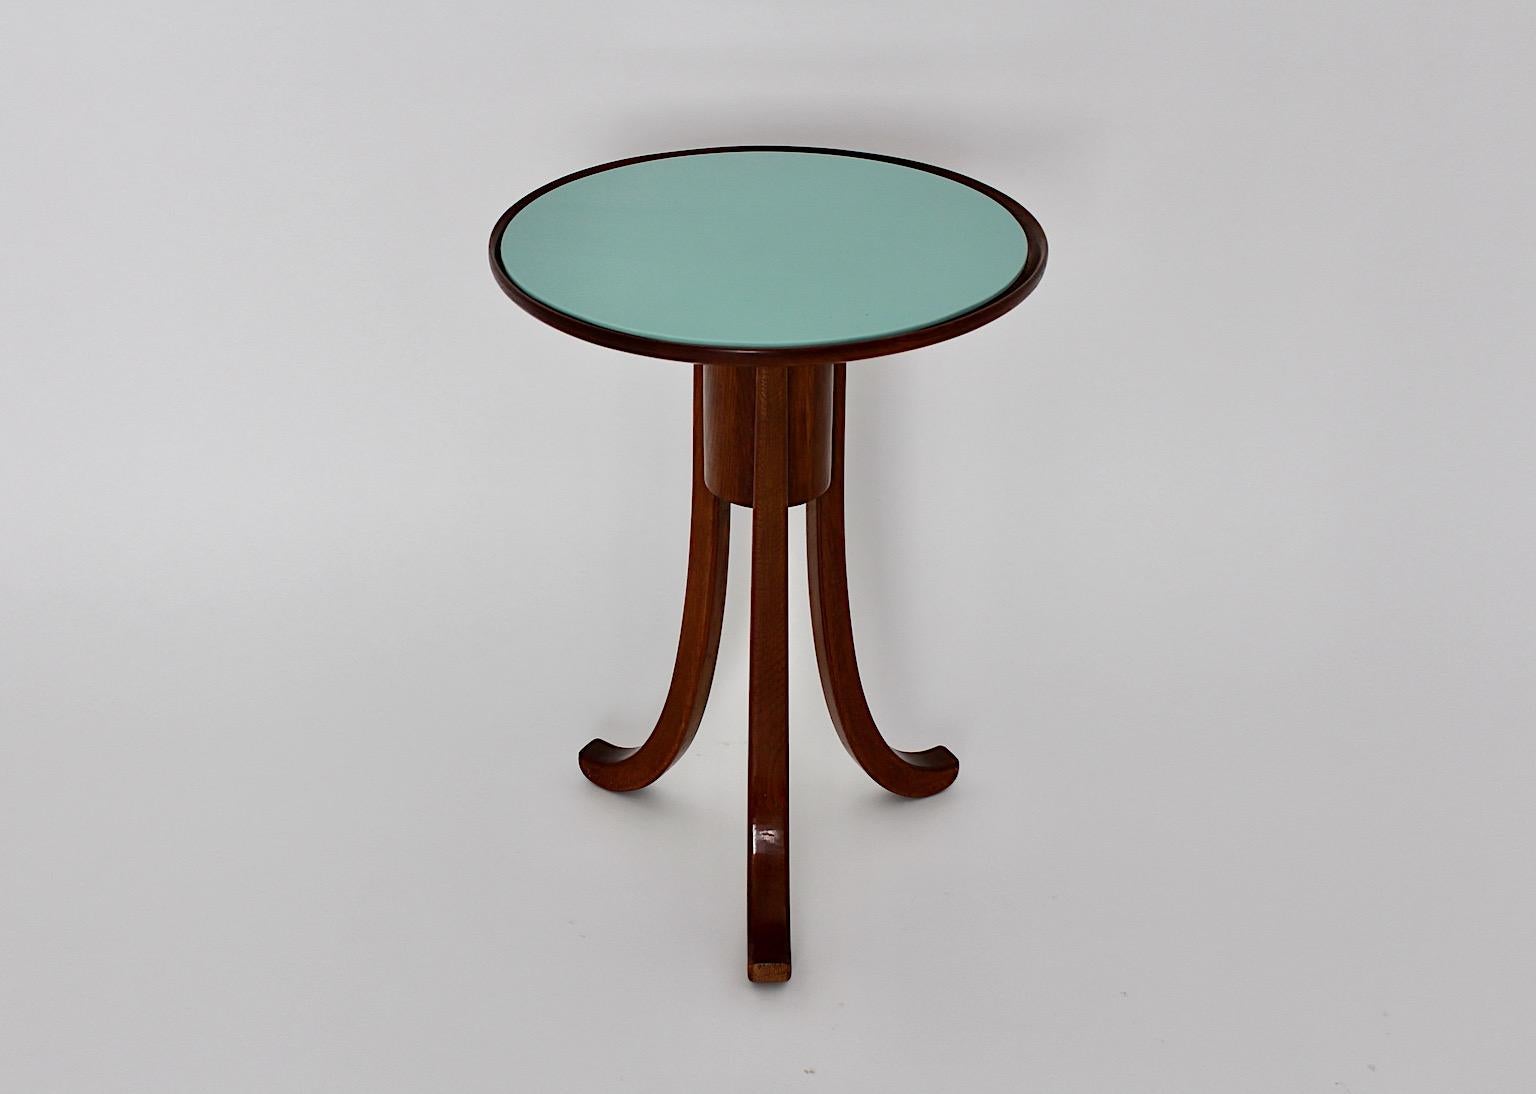 Art Deco vintage side table attributed to Josef Frank for Haus & Garten 1930s Vienna from brown stained oak and green teal glass plate in round shape with three legs.
While the base was made from solid oak the top was made from oak veneer with a